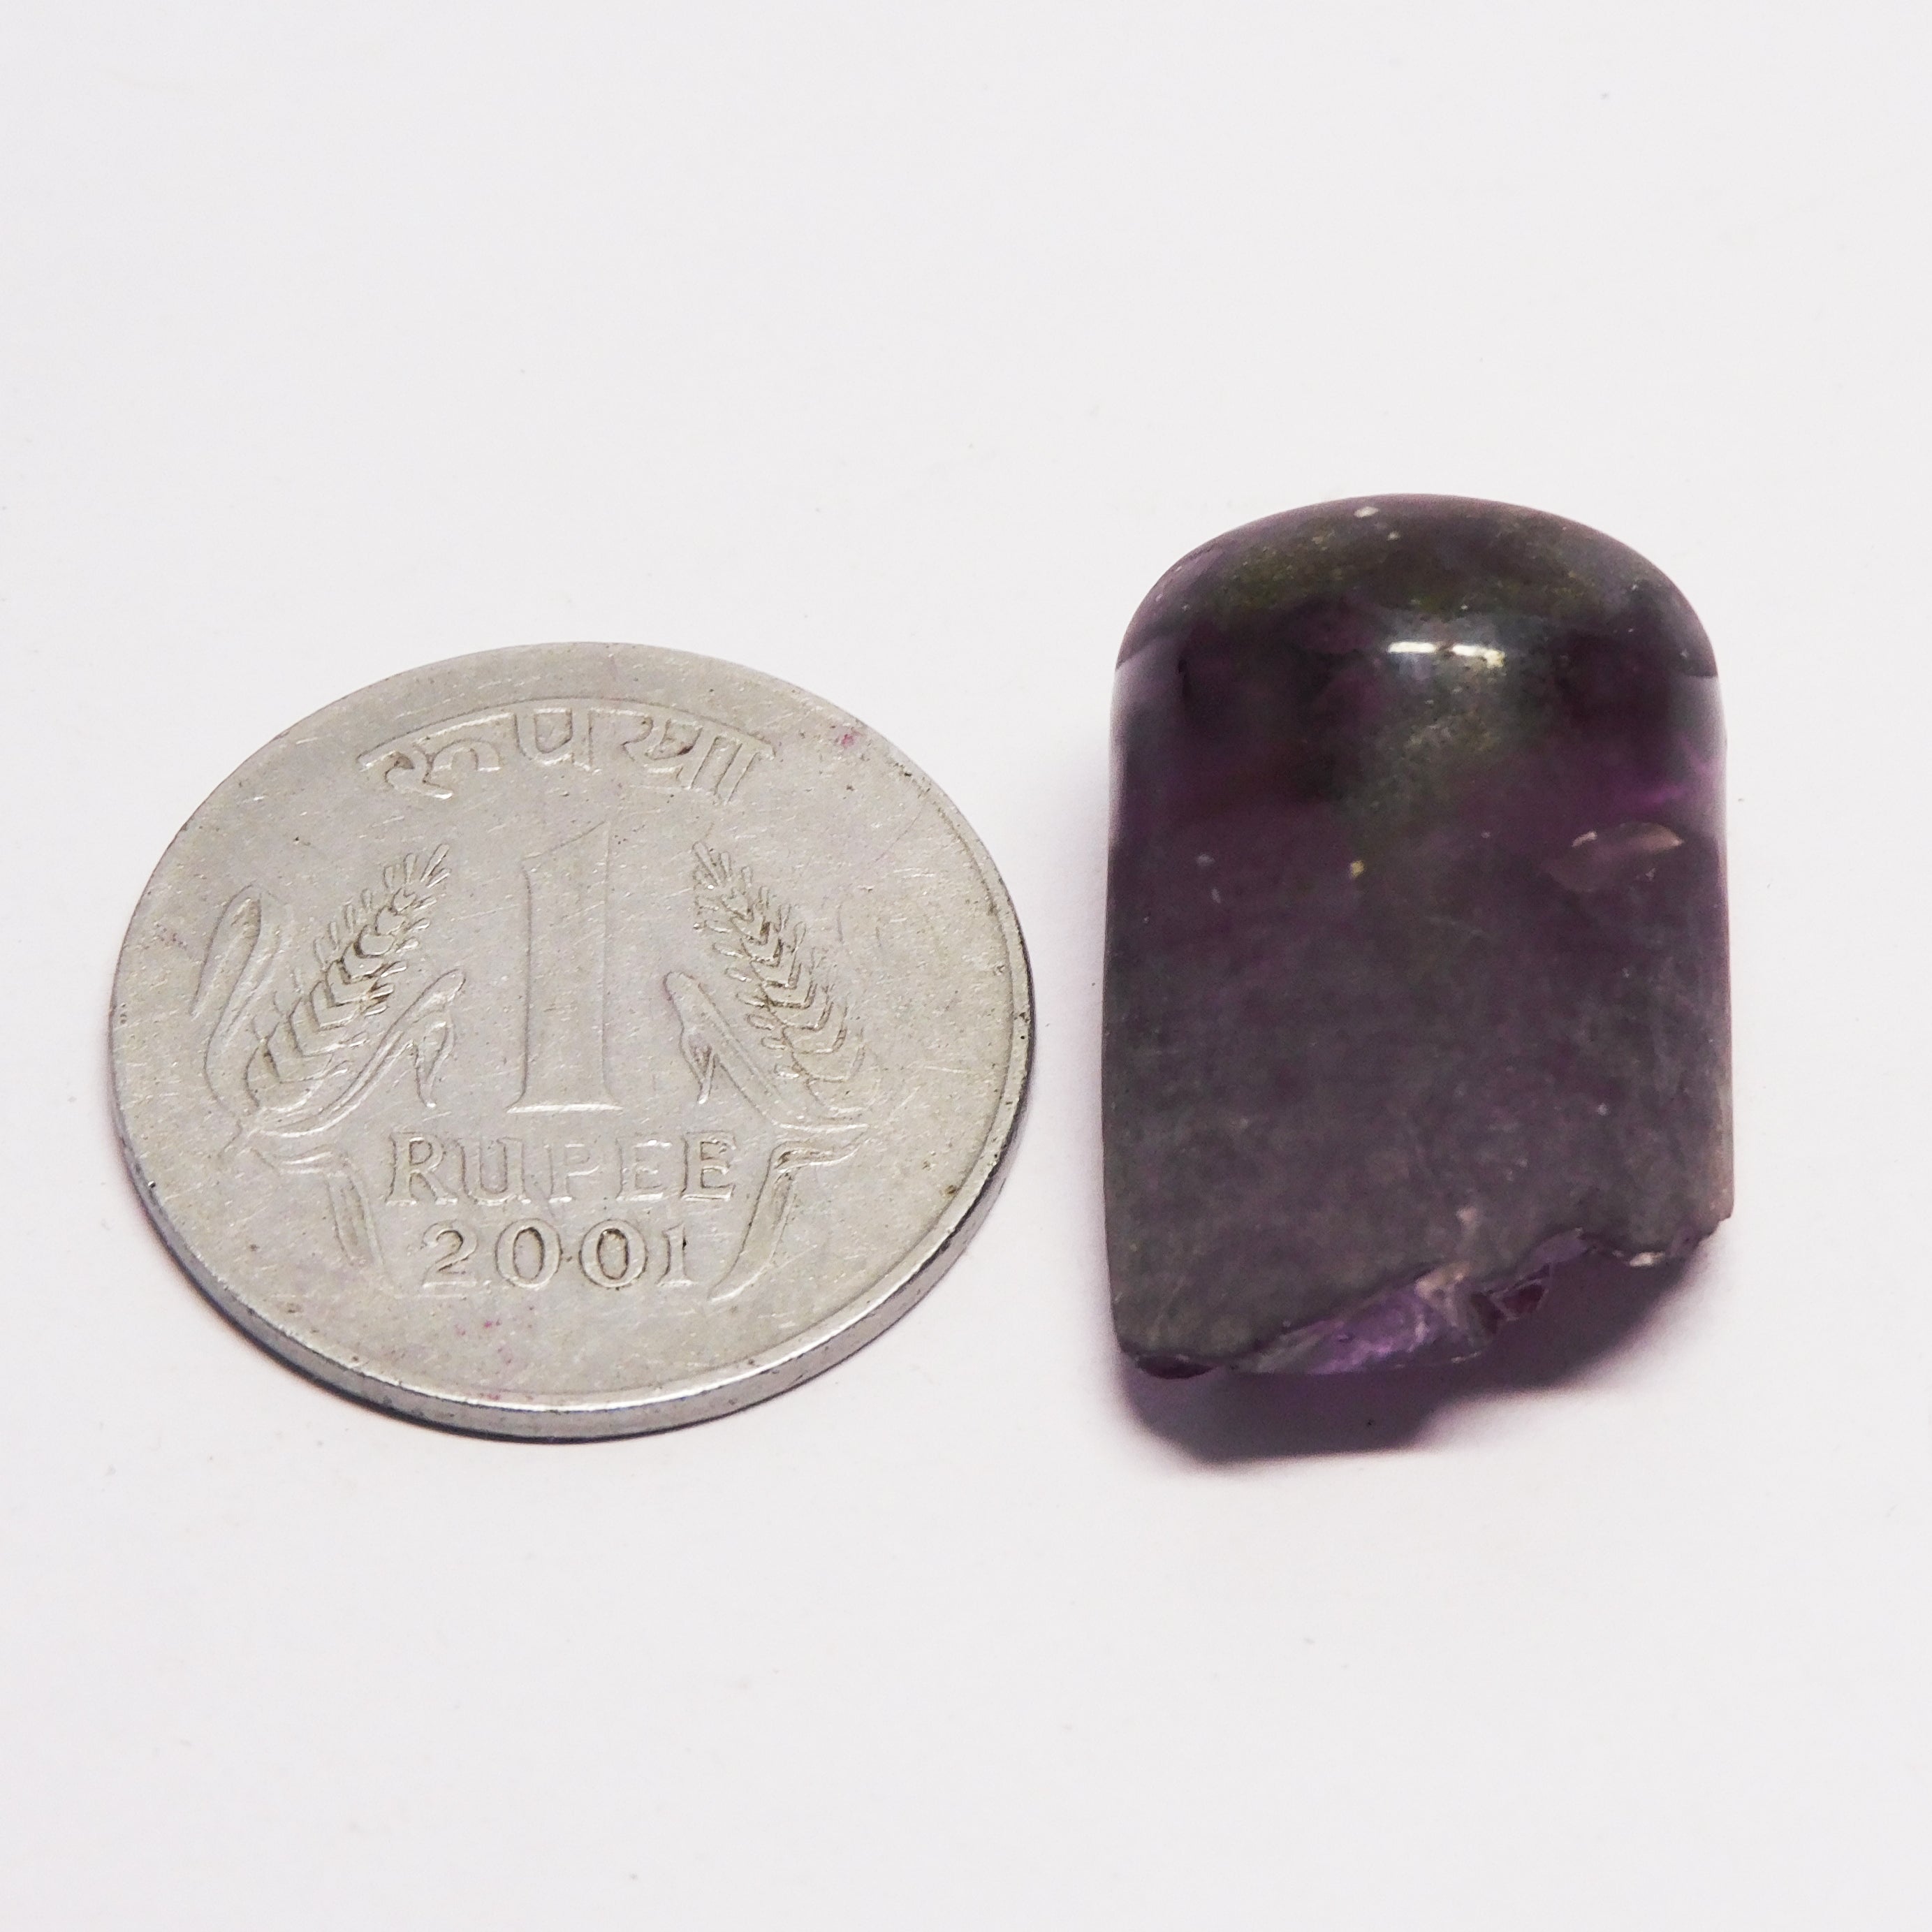 ON SALE !! Color Change Alexandrite 58.45 Carat Natural Alexandrite Rough From Russia CERTIFIED Loose Gemstone